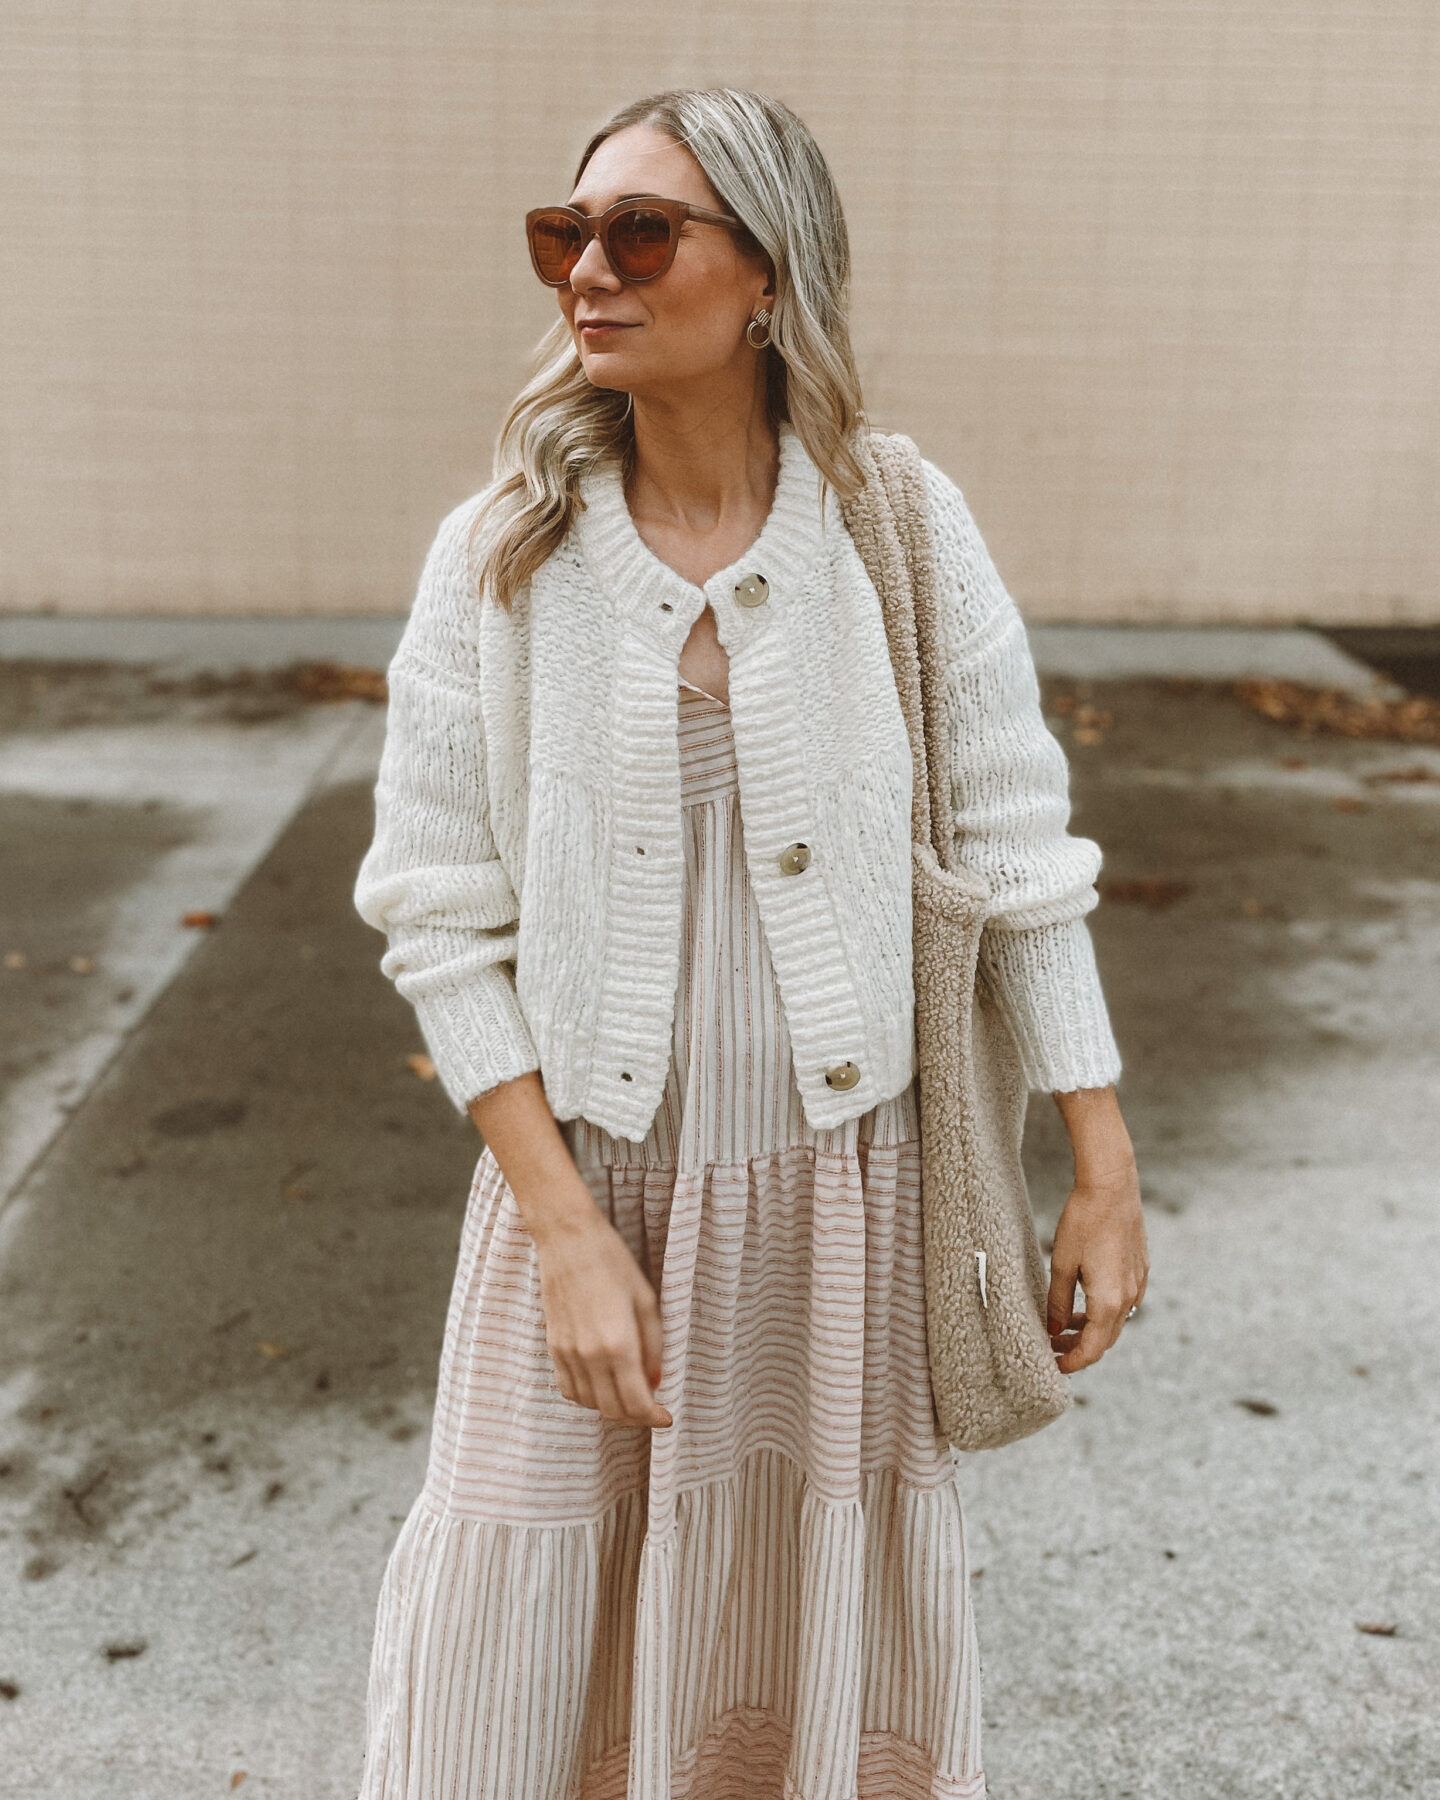 Karin Emily wears a fall maxi dress with an everlane cropped cardigan, velvet Mary Jane's, oversized sunglasses and a sherpa bag